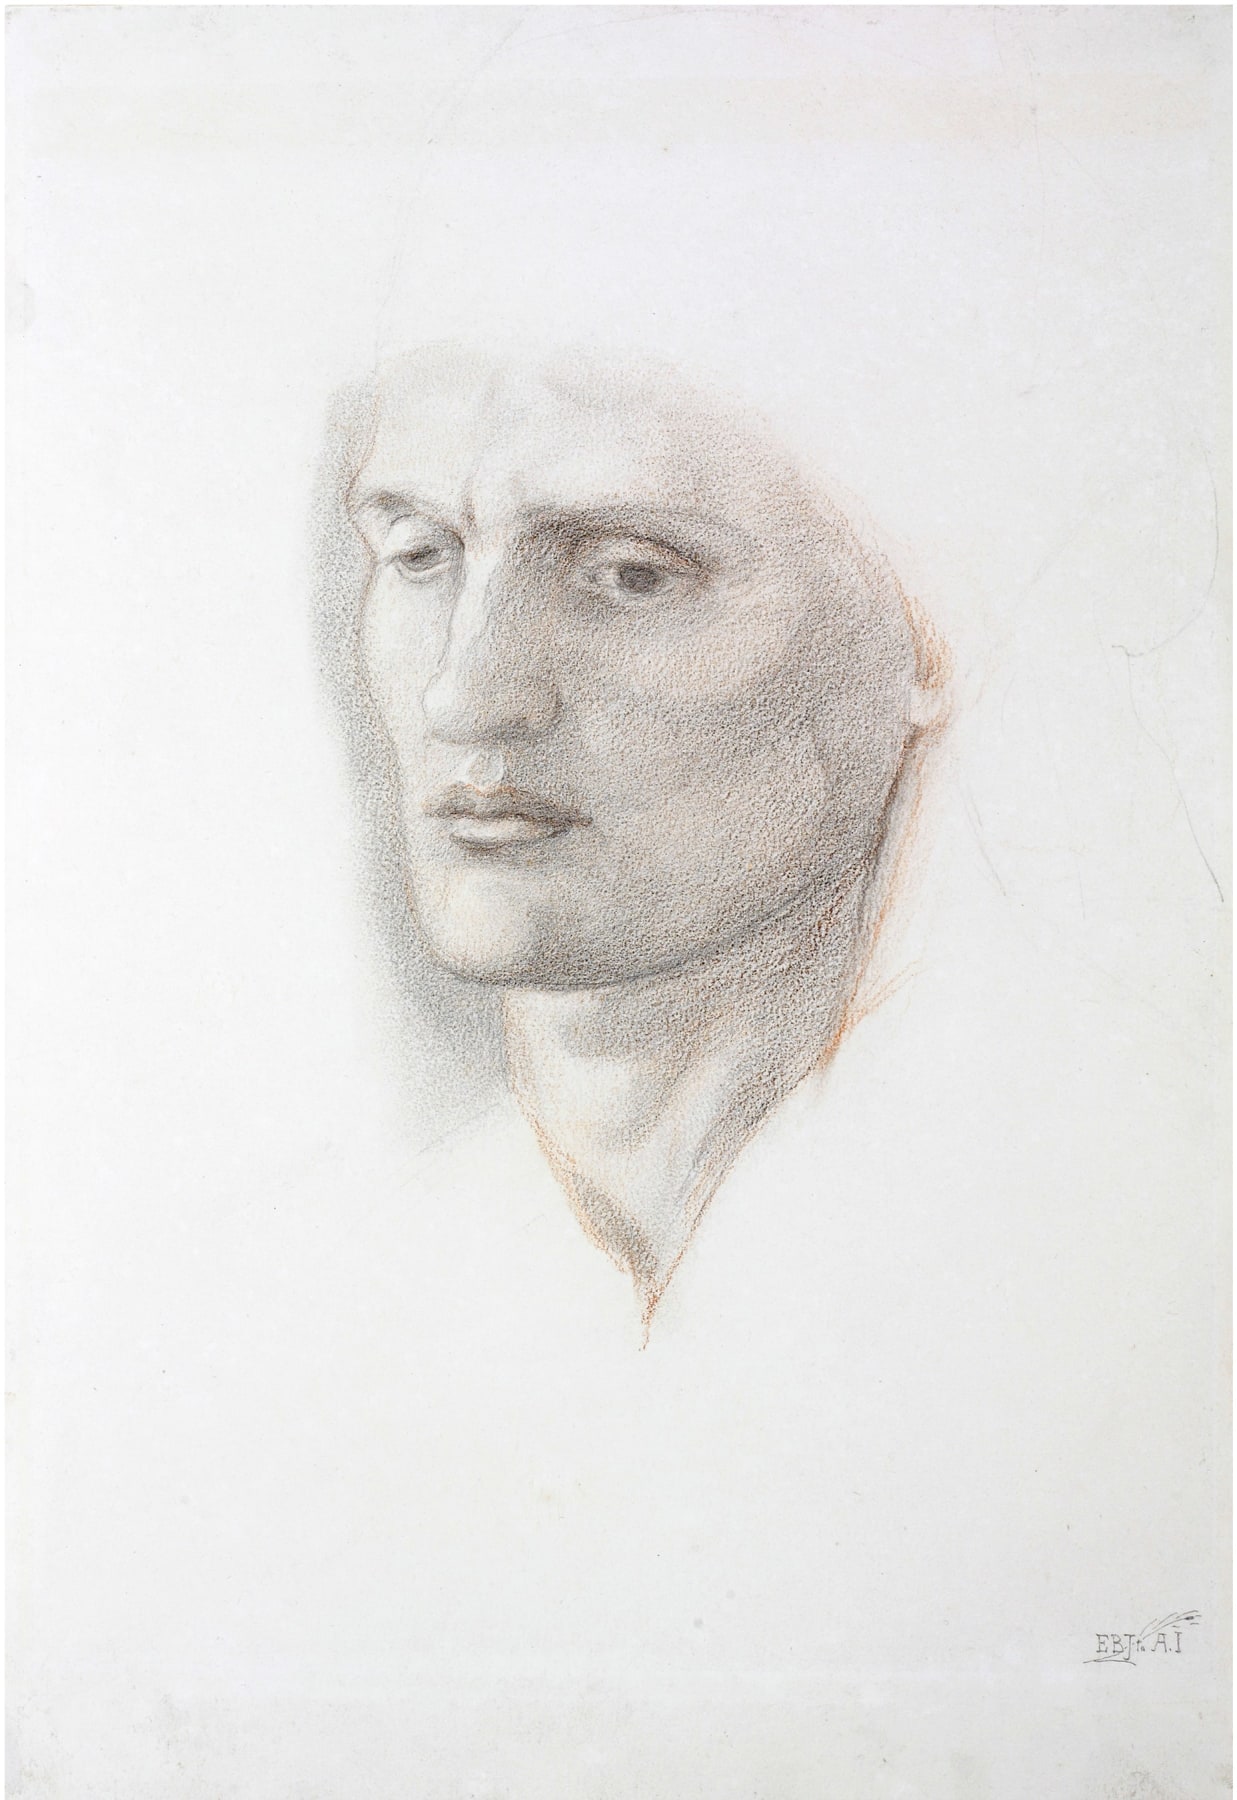 Edward Coley Burne-Jones  Portrait Head of a Man  Red and black chalk on paper 15 1/4 x 11 3/4 inches